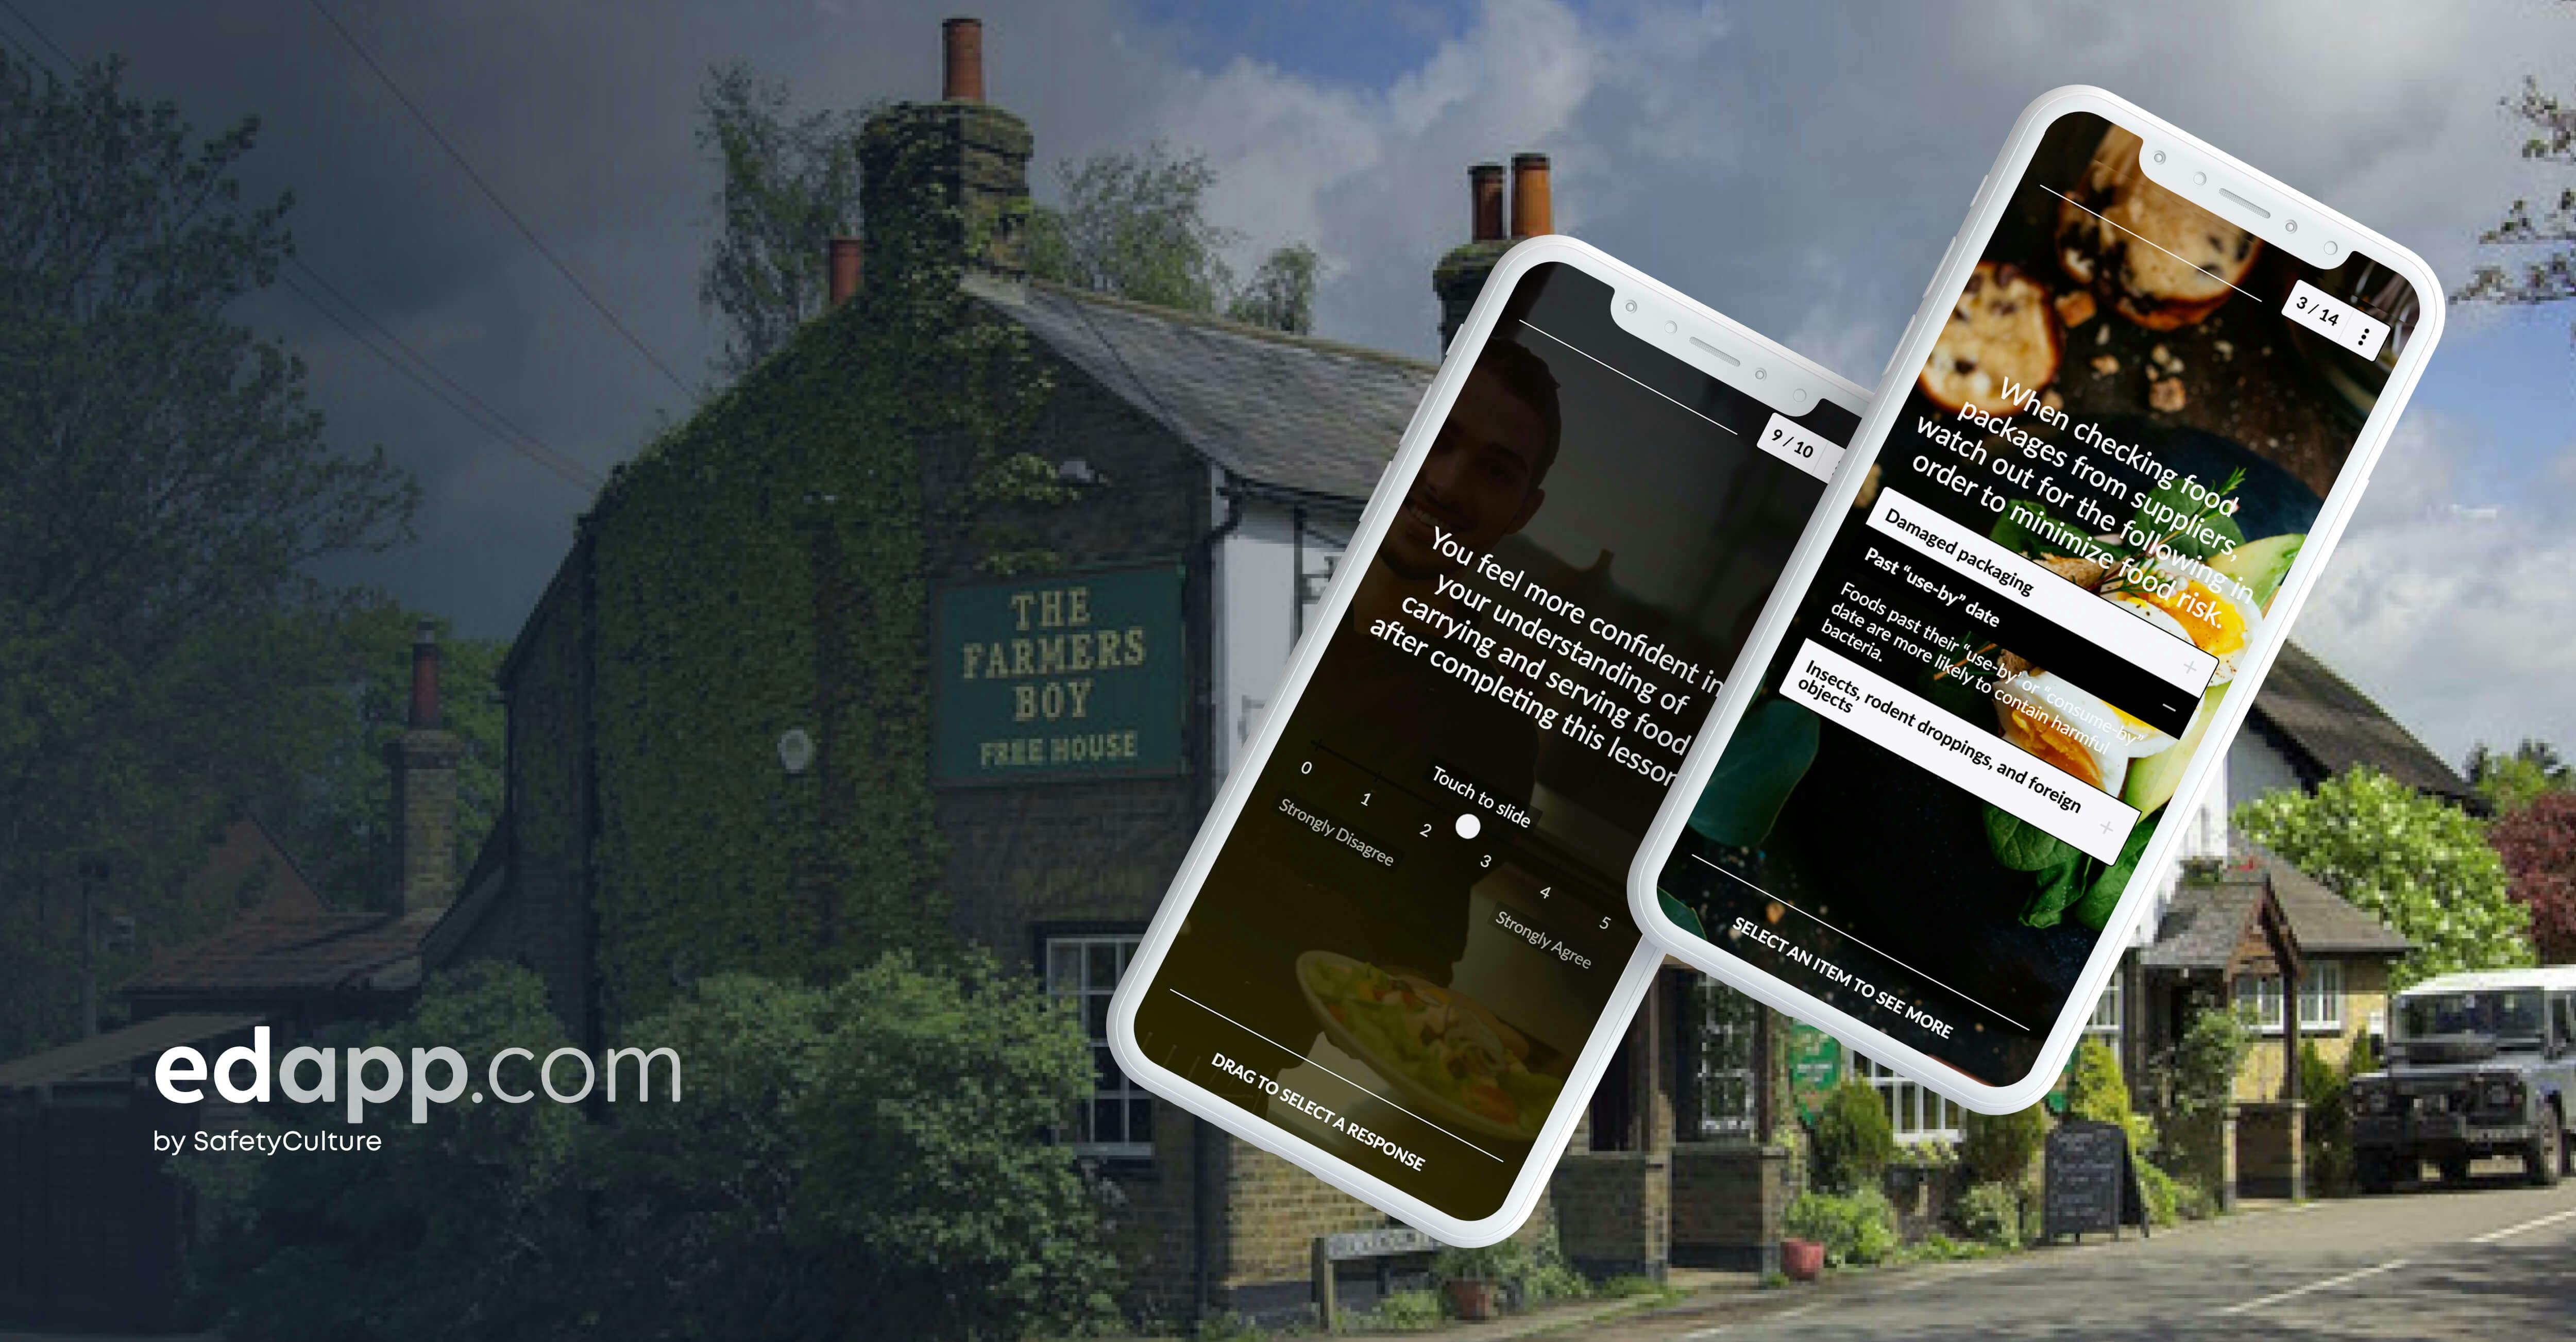 Number one pub, The Farmer’s Boy, challenges traditional training methods with mobile learning platform SC Training (formerly EdApp)